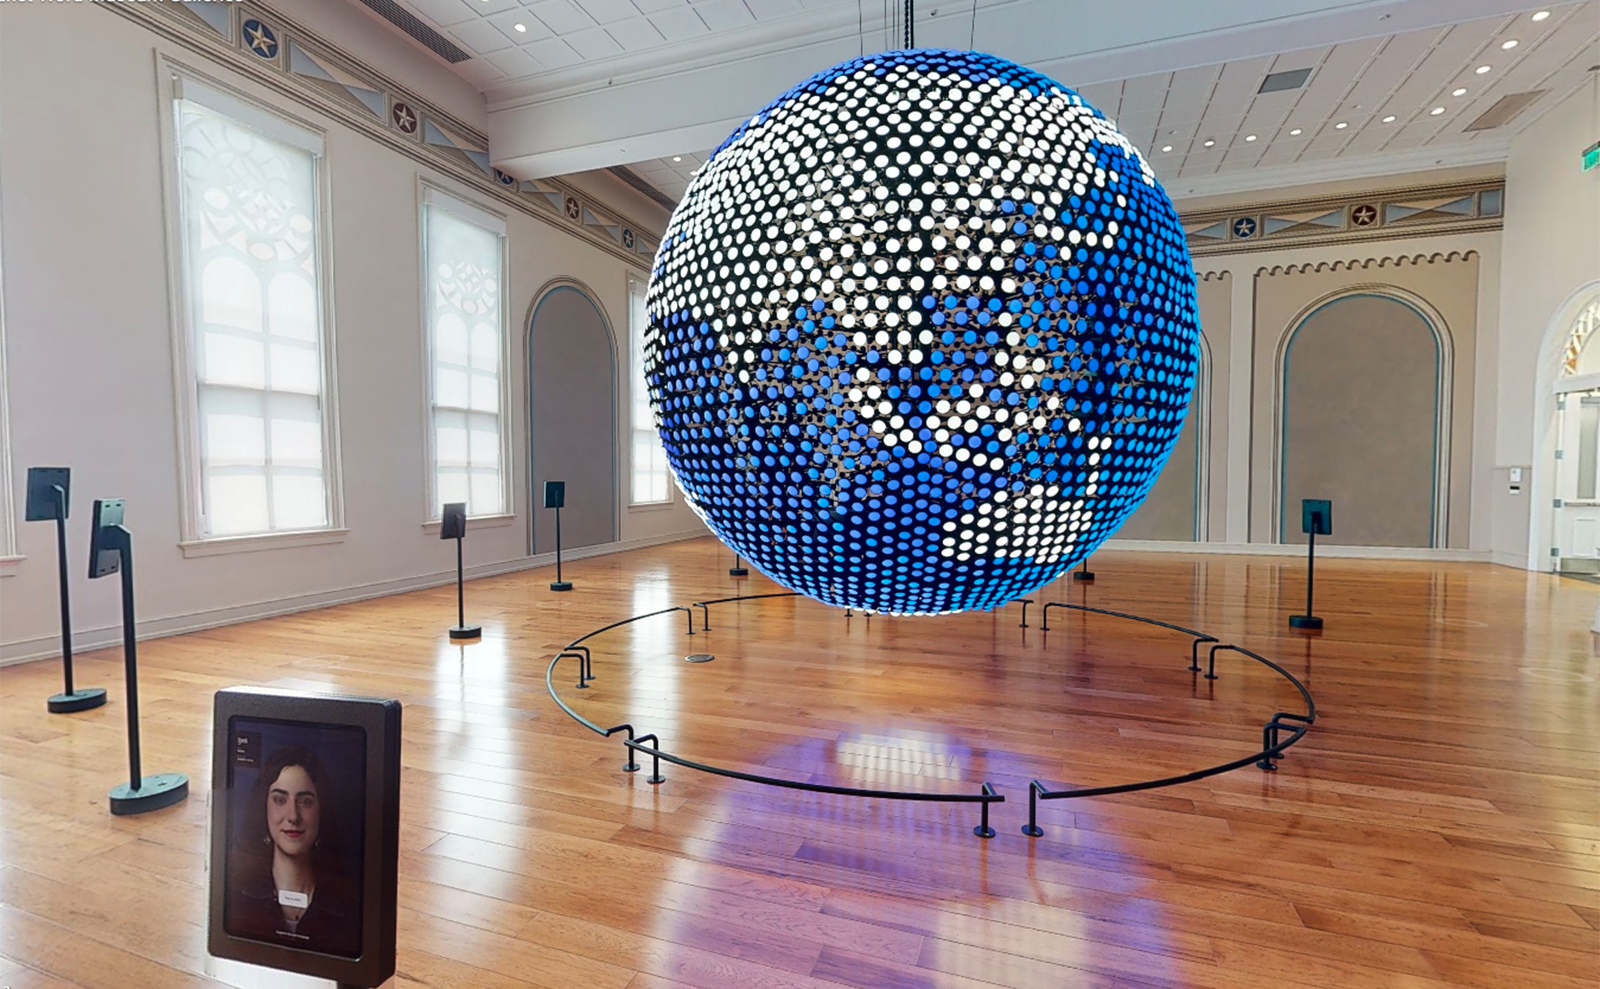 open airy room with an enormous globe made of lights in the center